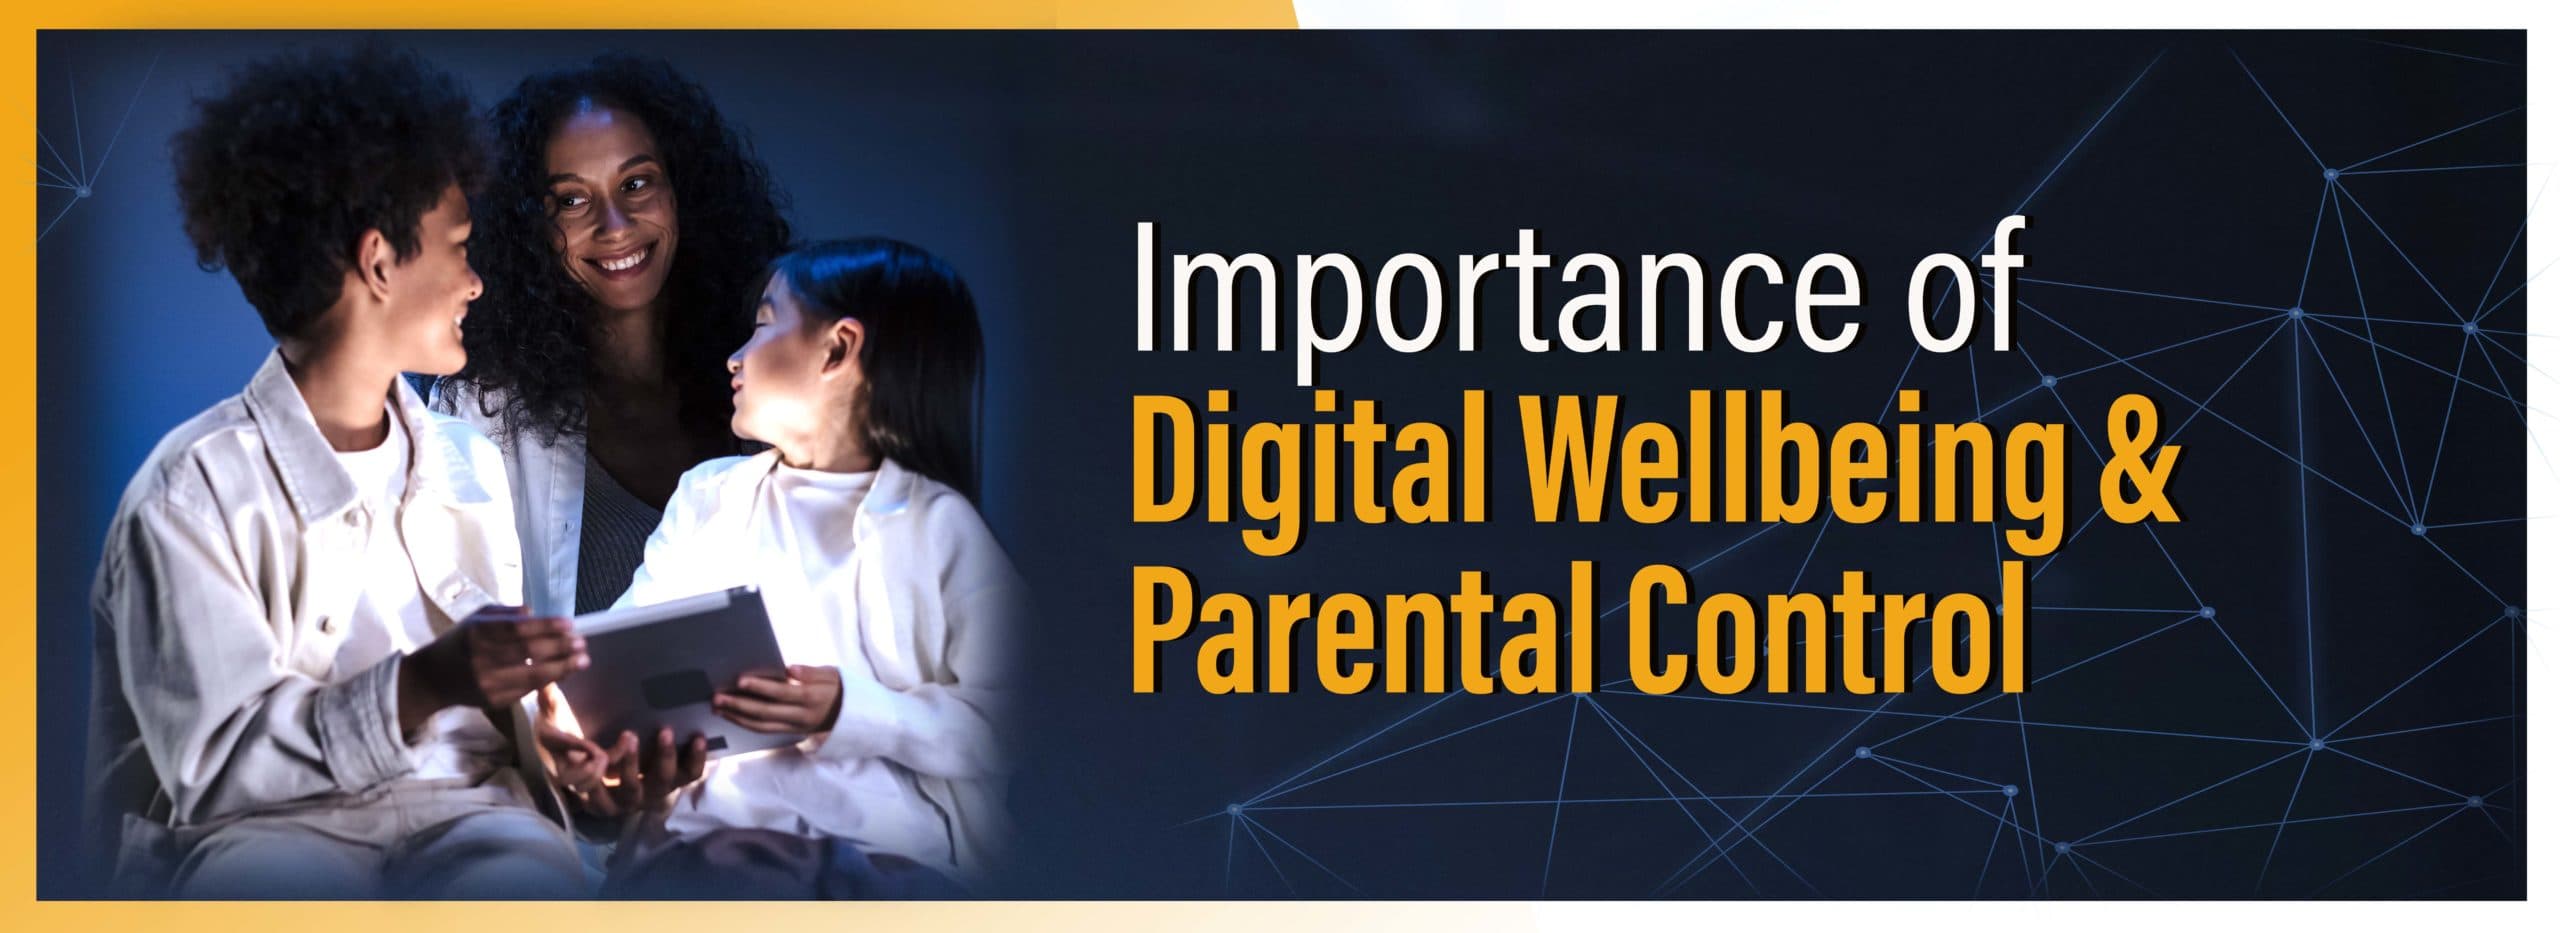 Digital Wellbeing and Parental Control Guide